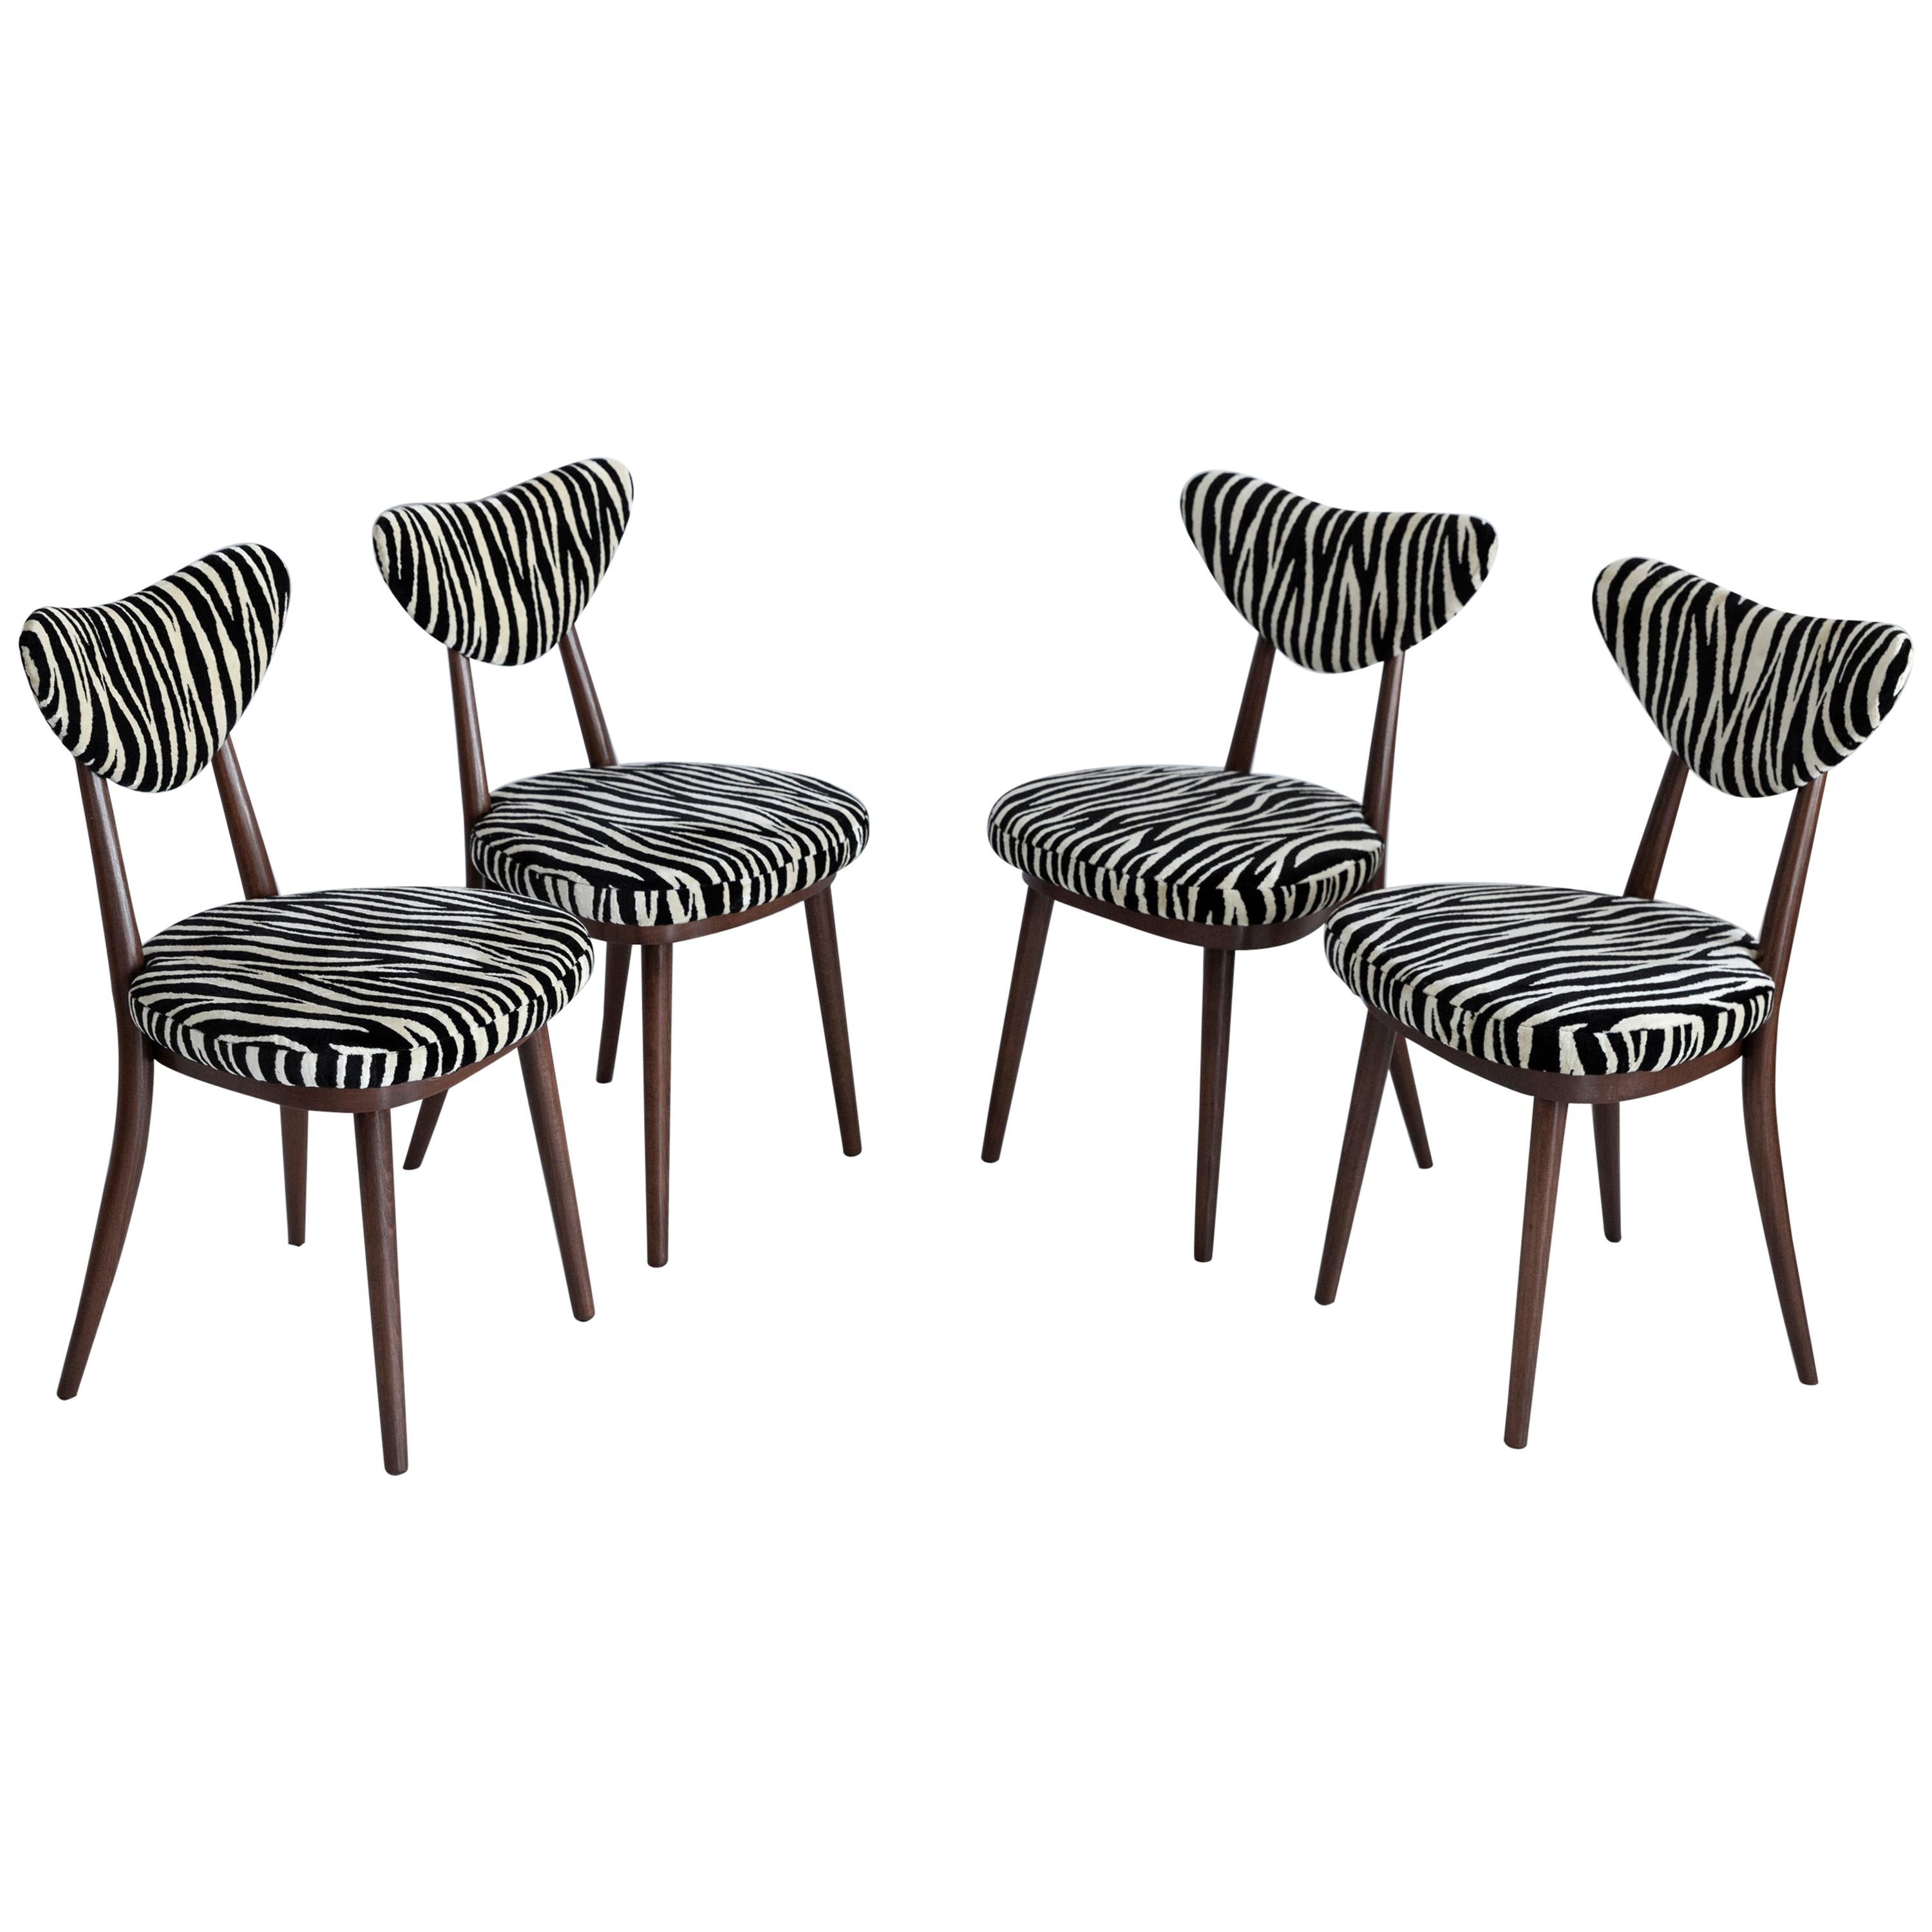 Set of Four Midcentury Zebra Black and White Heart Chairs, Poland, 1960s